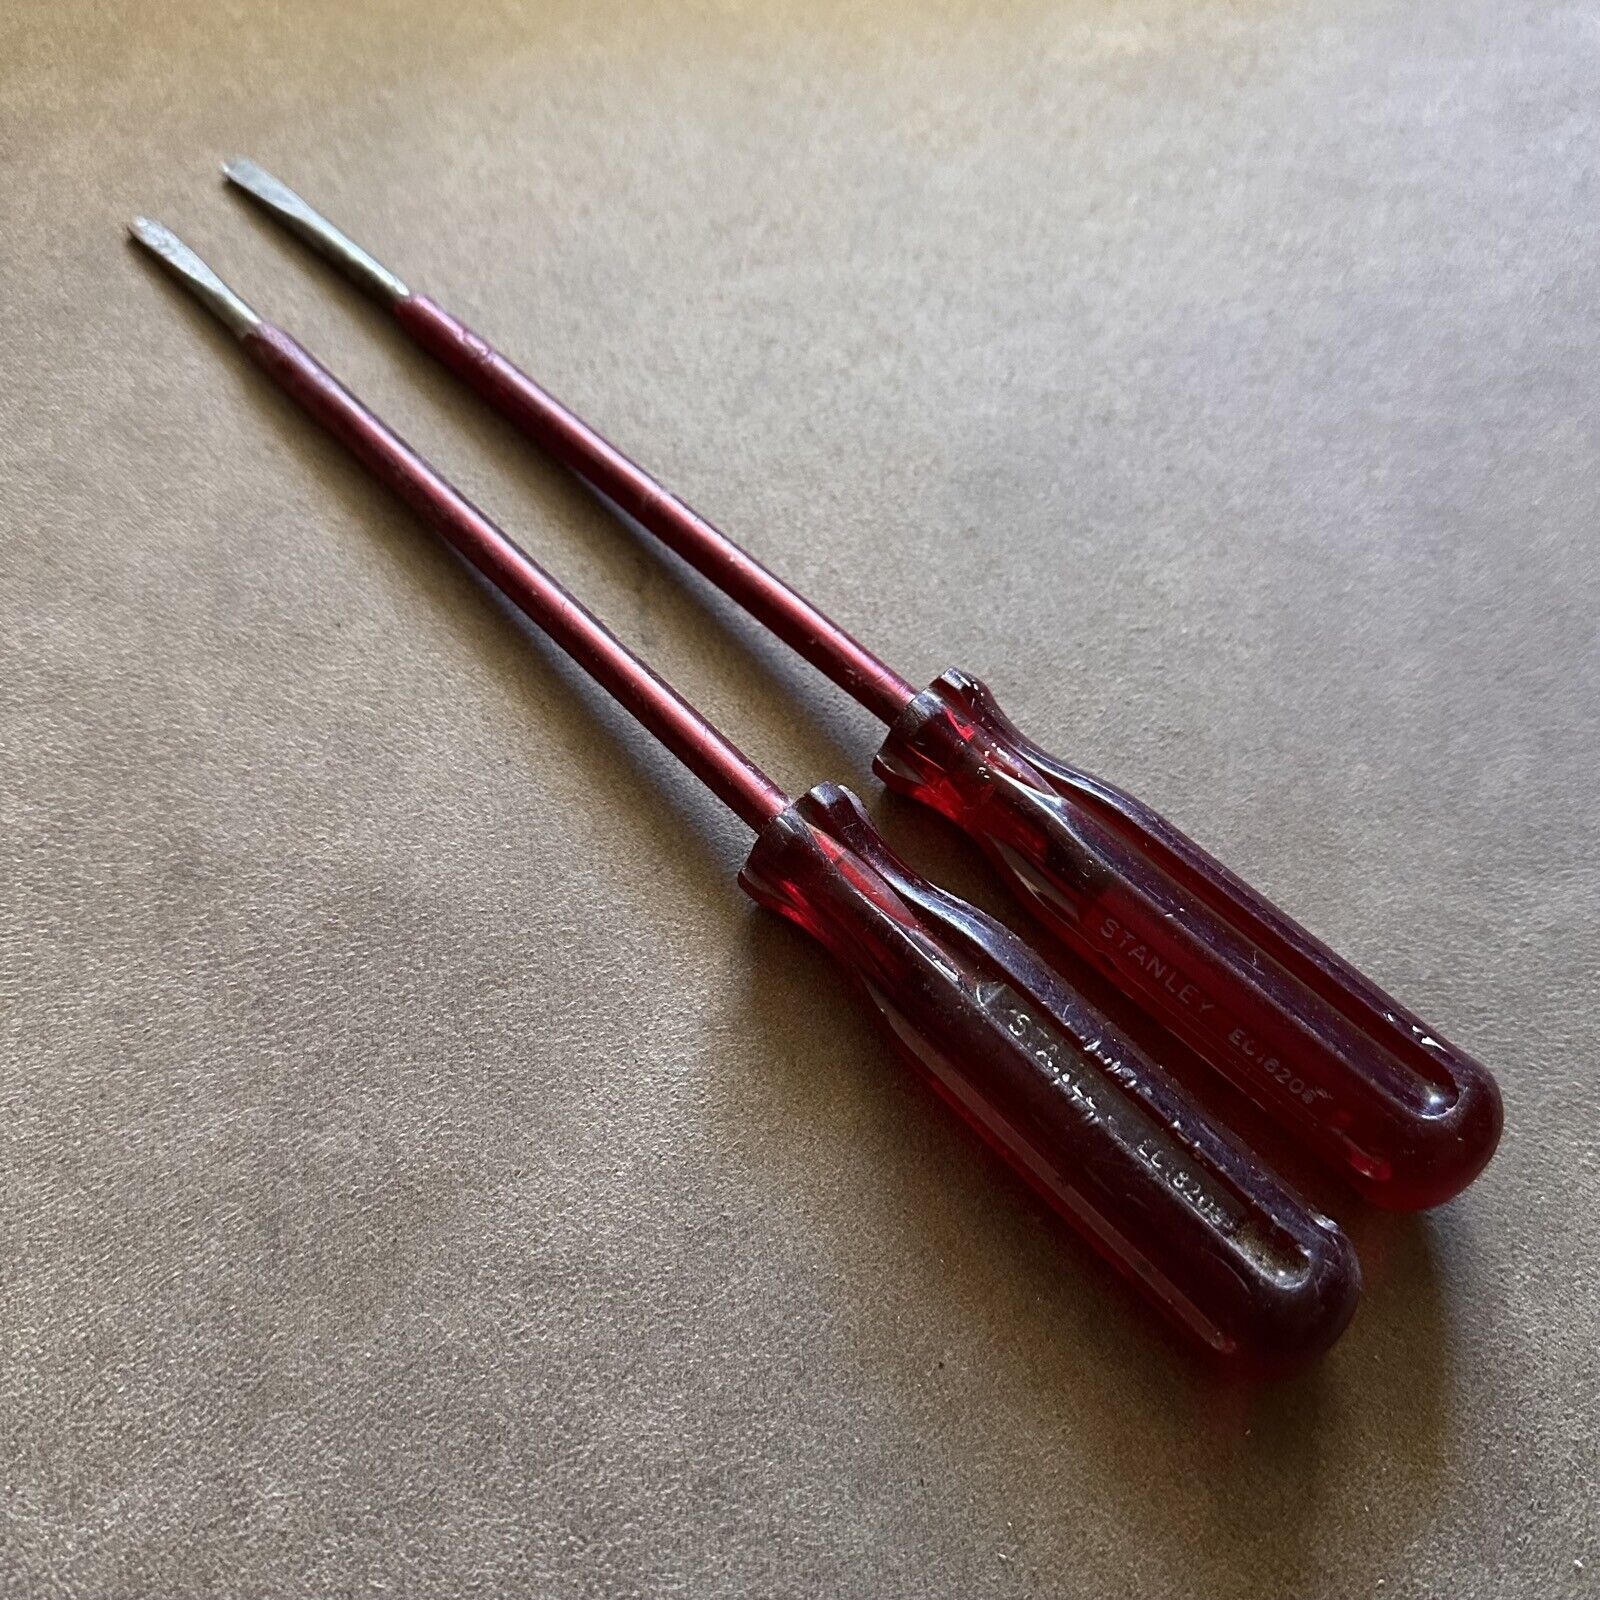 VINTAGE STANLEY INSULATED FLAT HEAD SLOTTED SCREWDRIVERS MADE IN AUSTRALIA